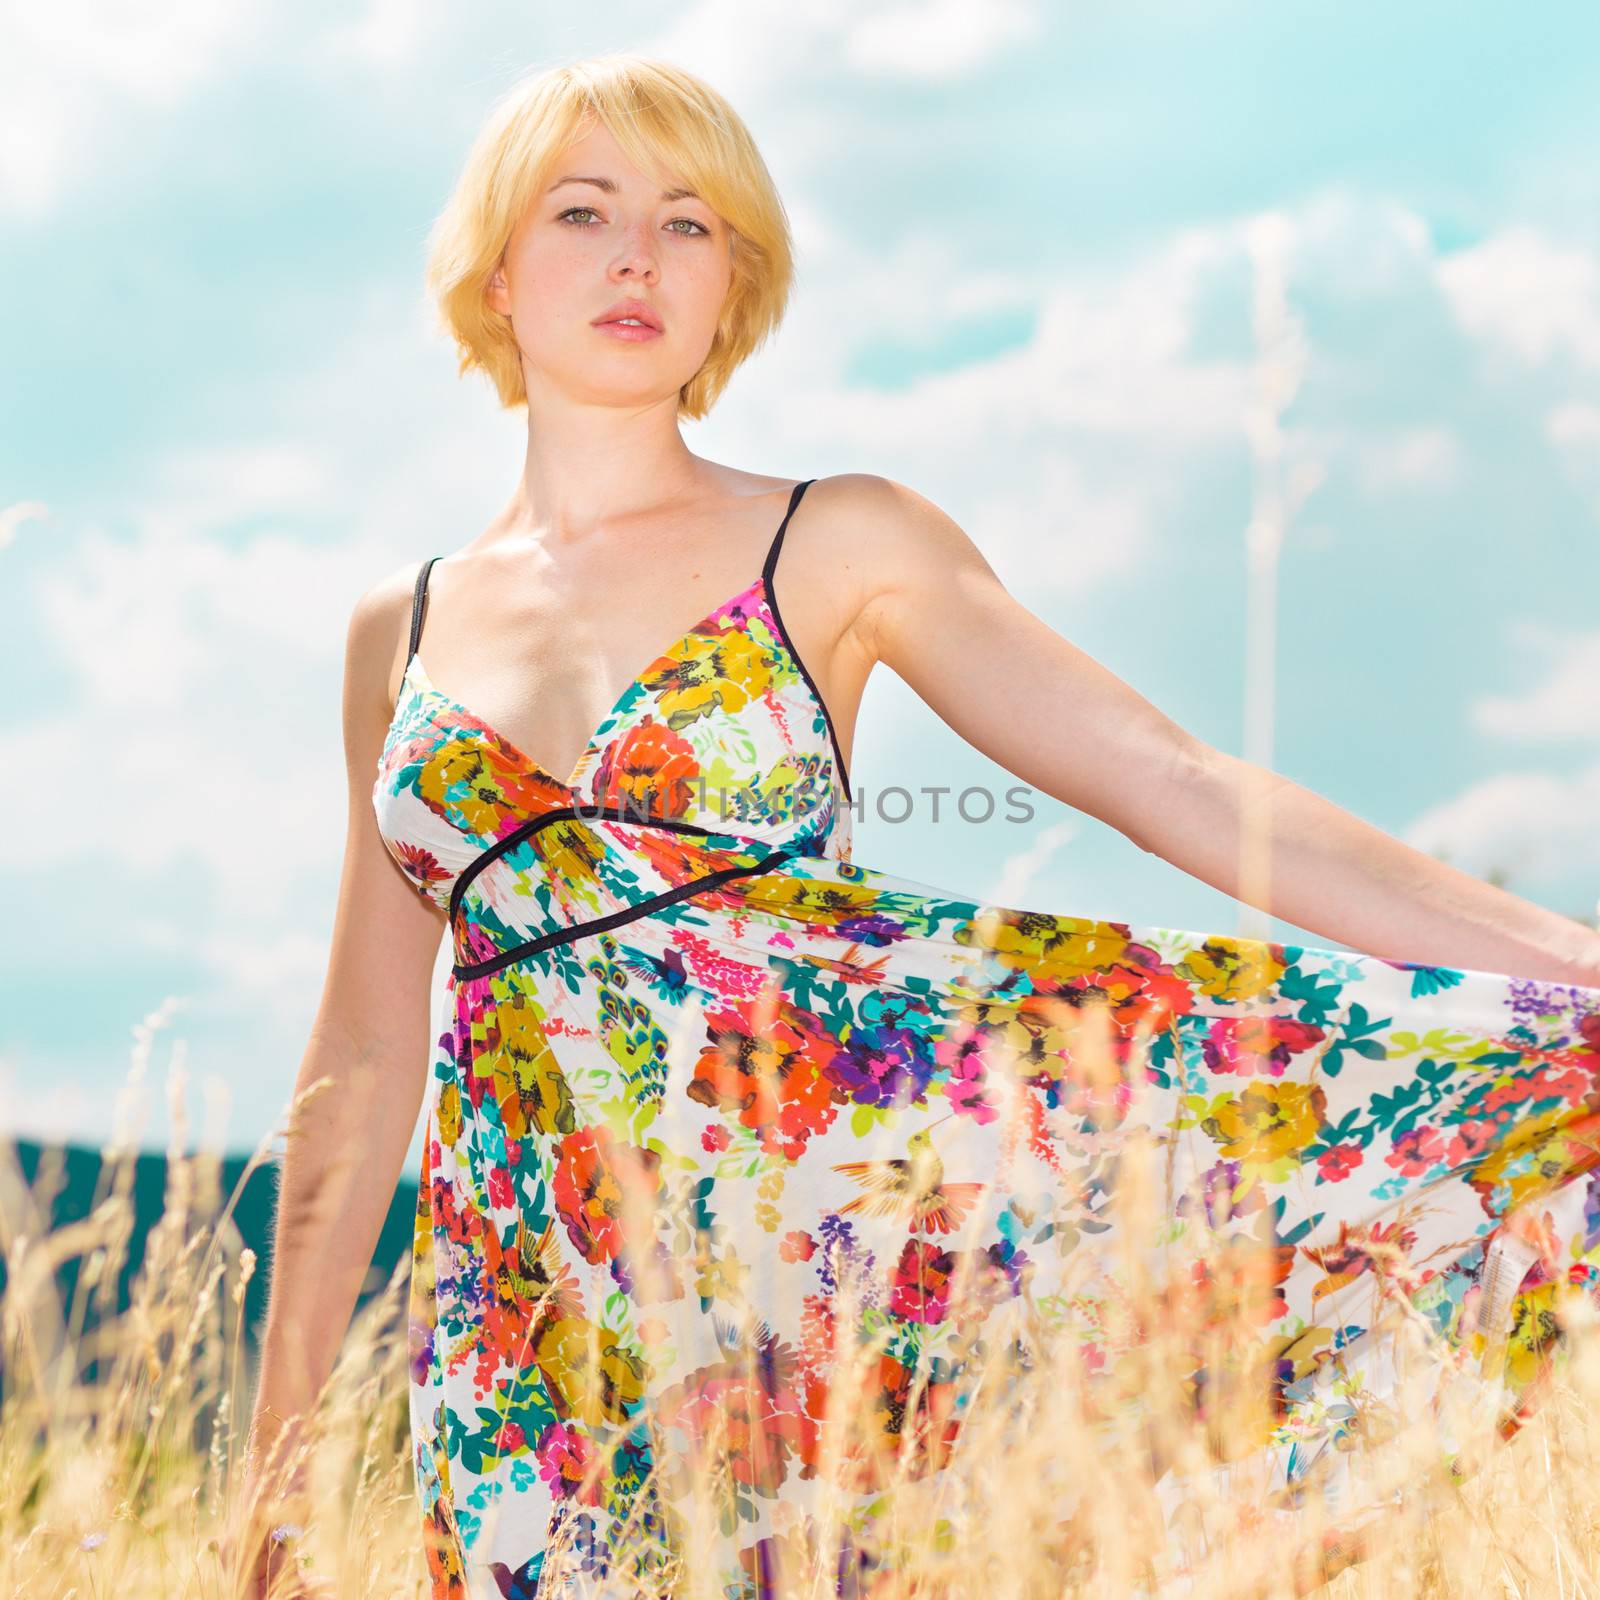 Lady enjoying the nature. Young woman enjoying the fresh air in summer meadow.